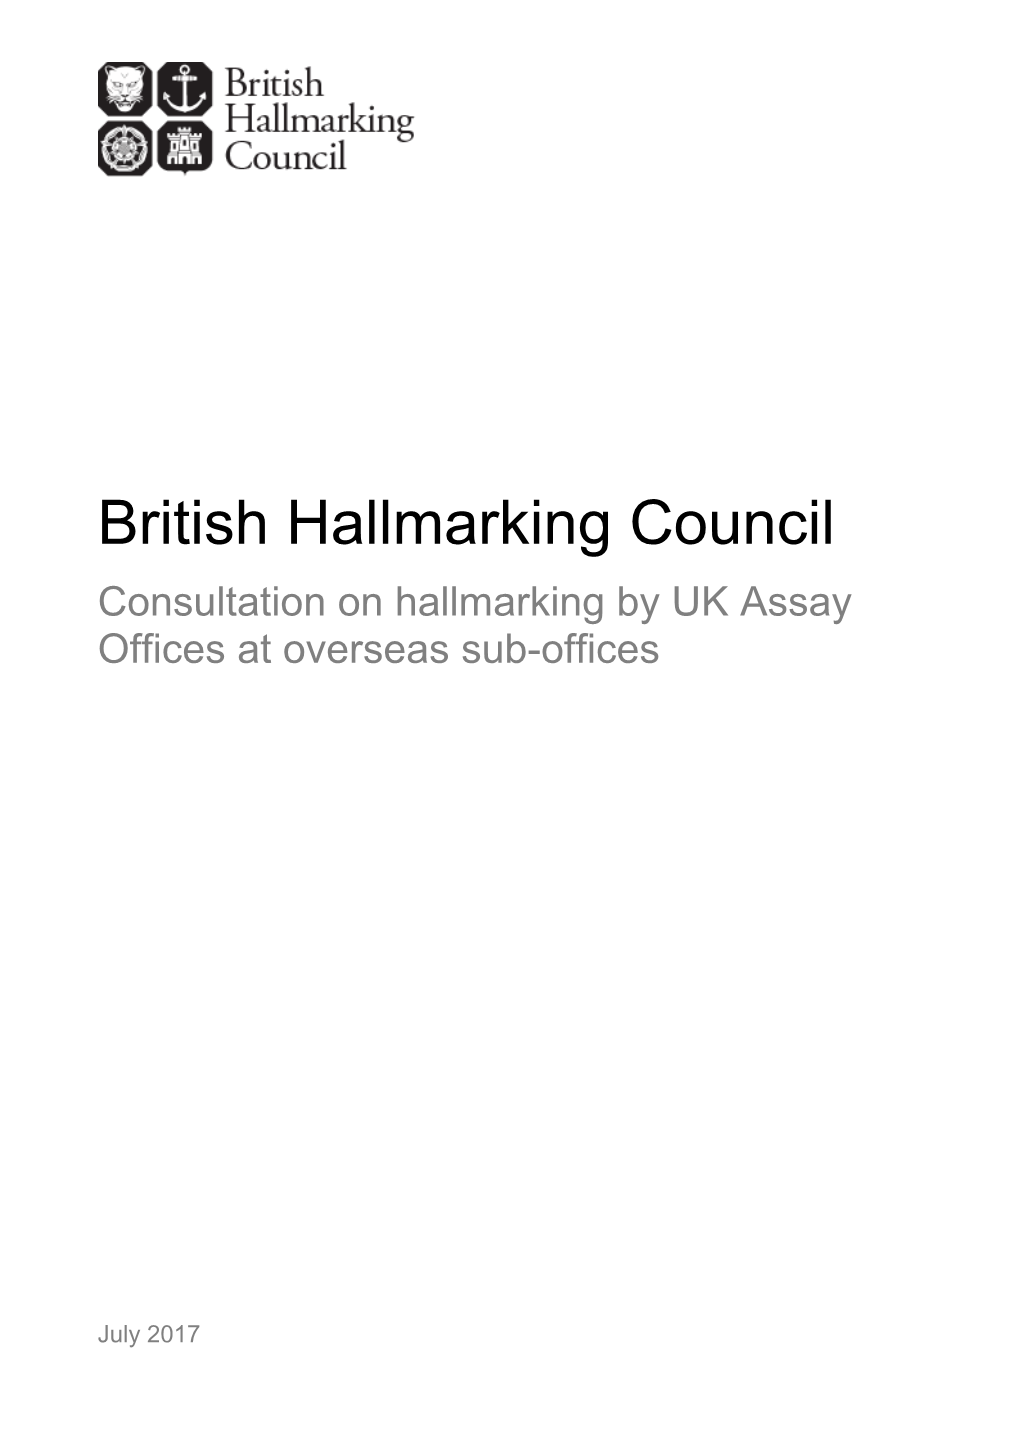 Consultation on Hallmarking by UK Assay Offices at Overseas Sub-Offices